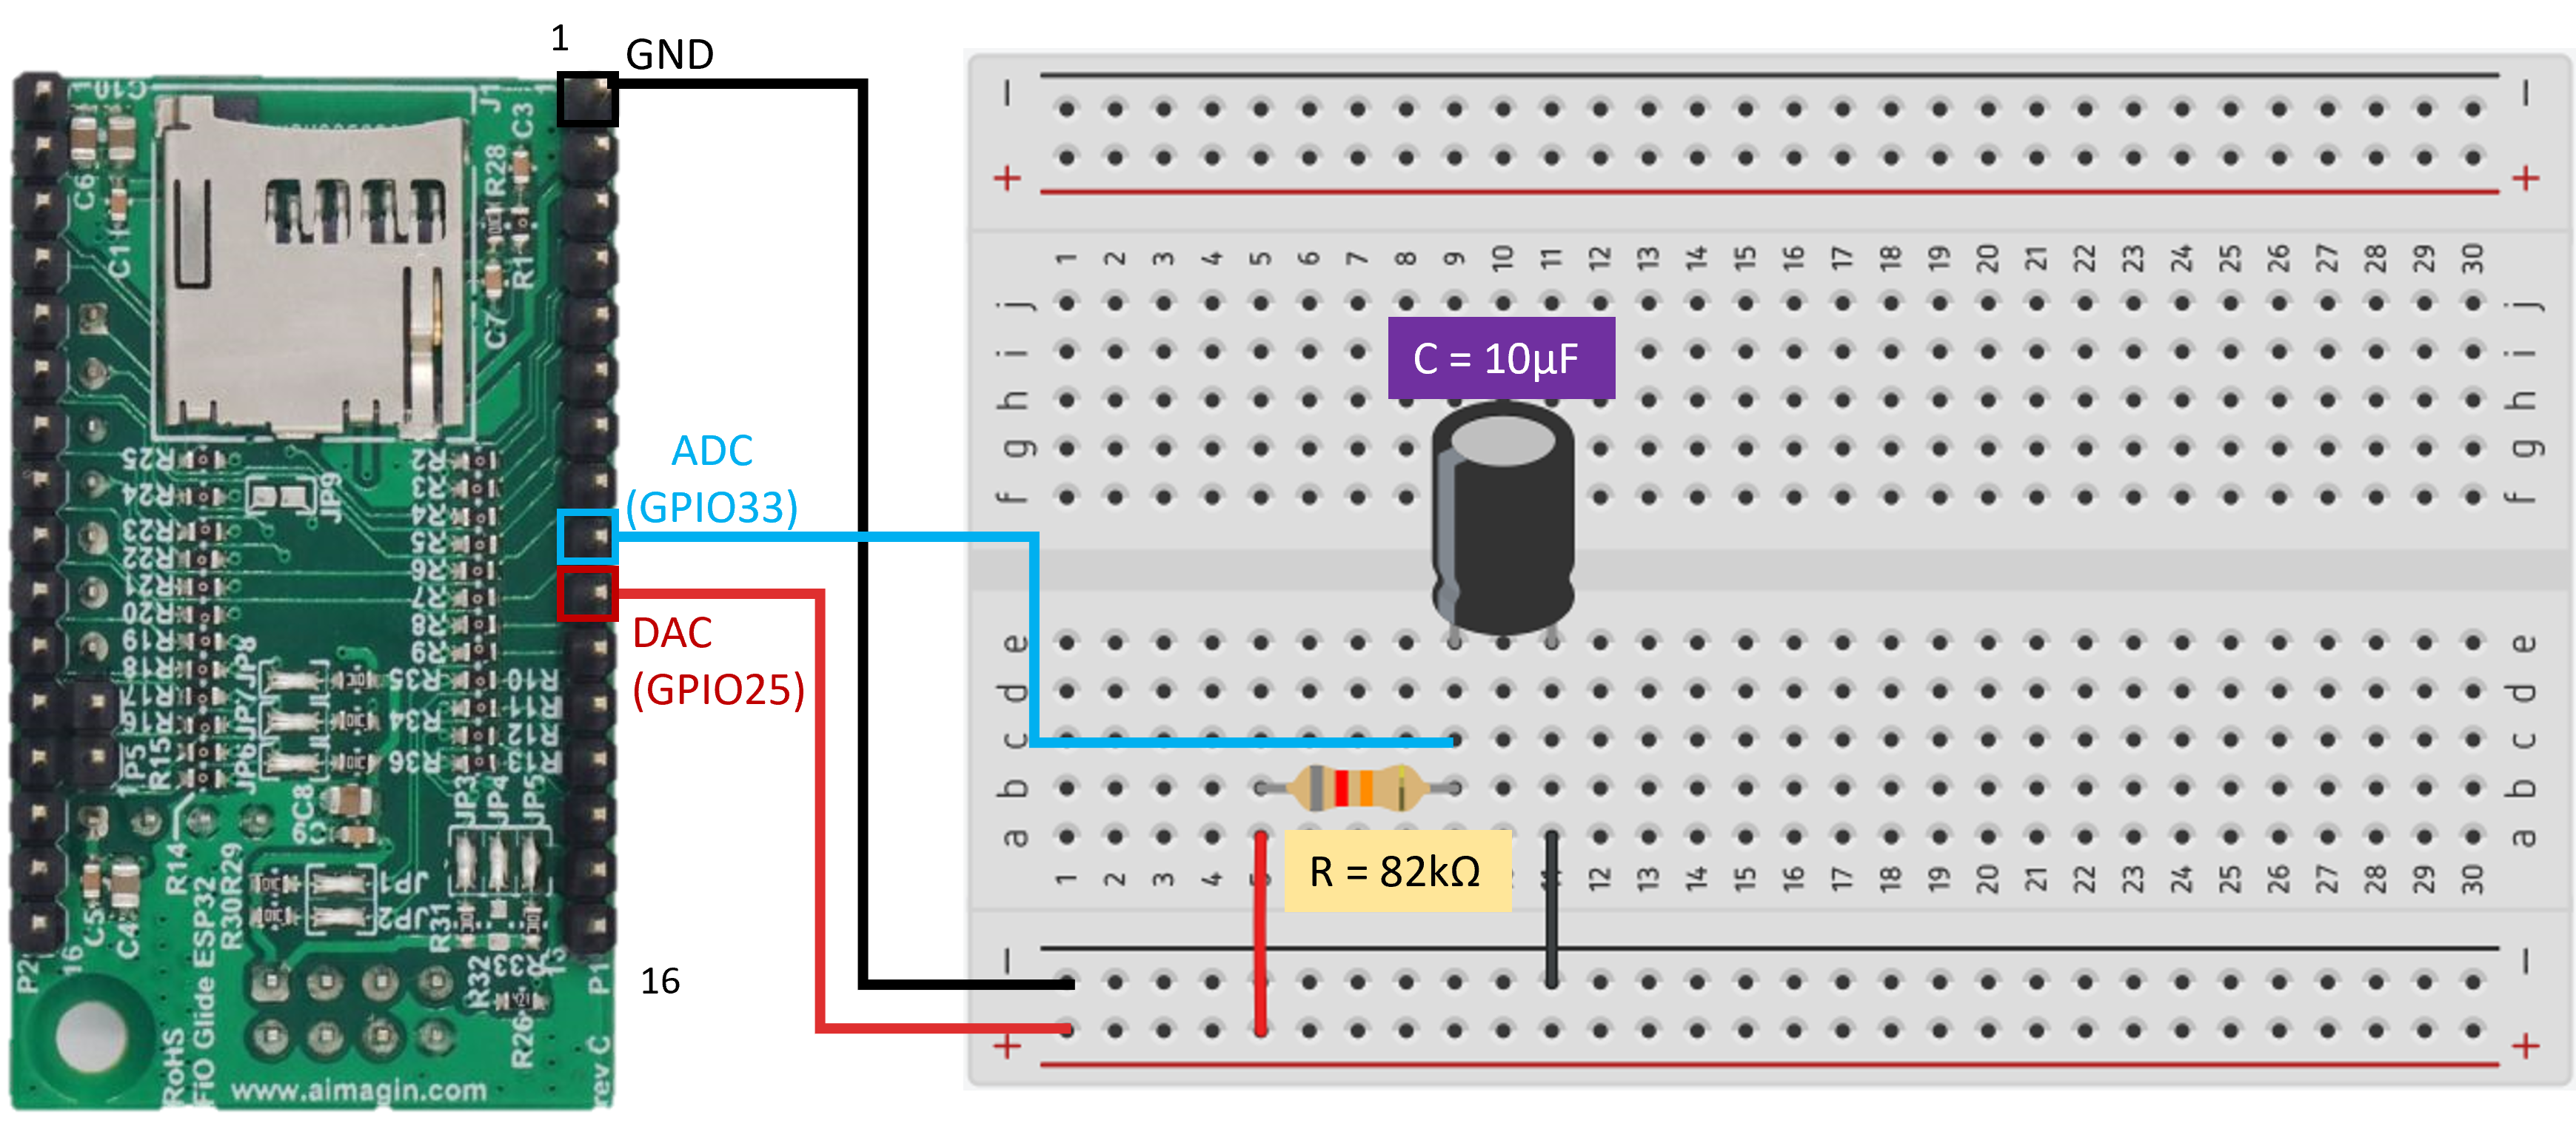 Figure 8: Wiring Connections between an RC Circuit and aMG FiO Glide ESP32